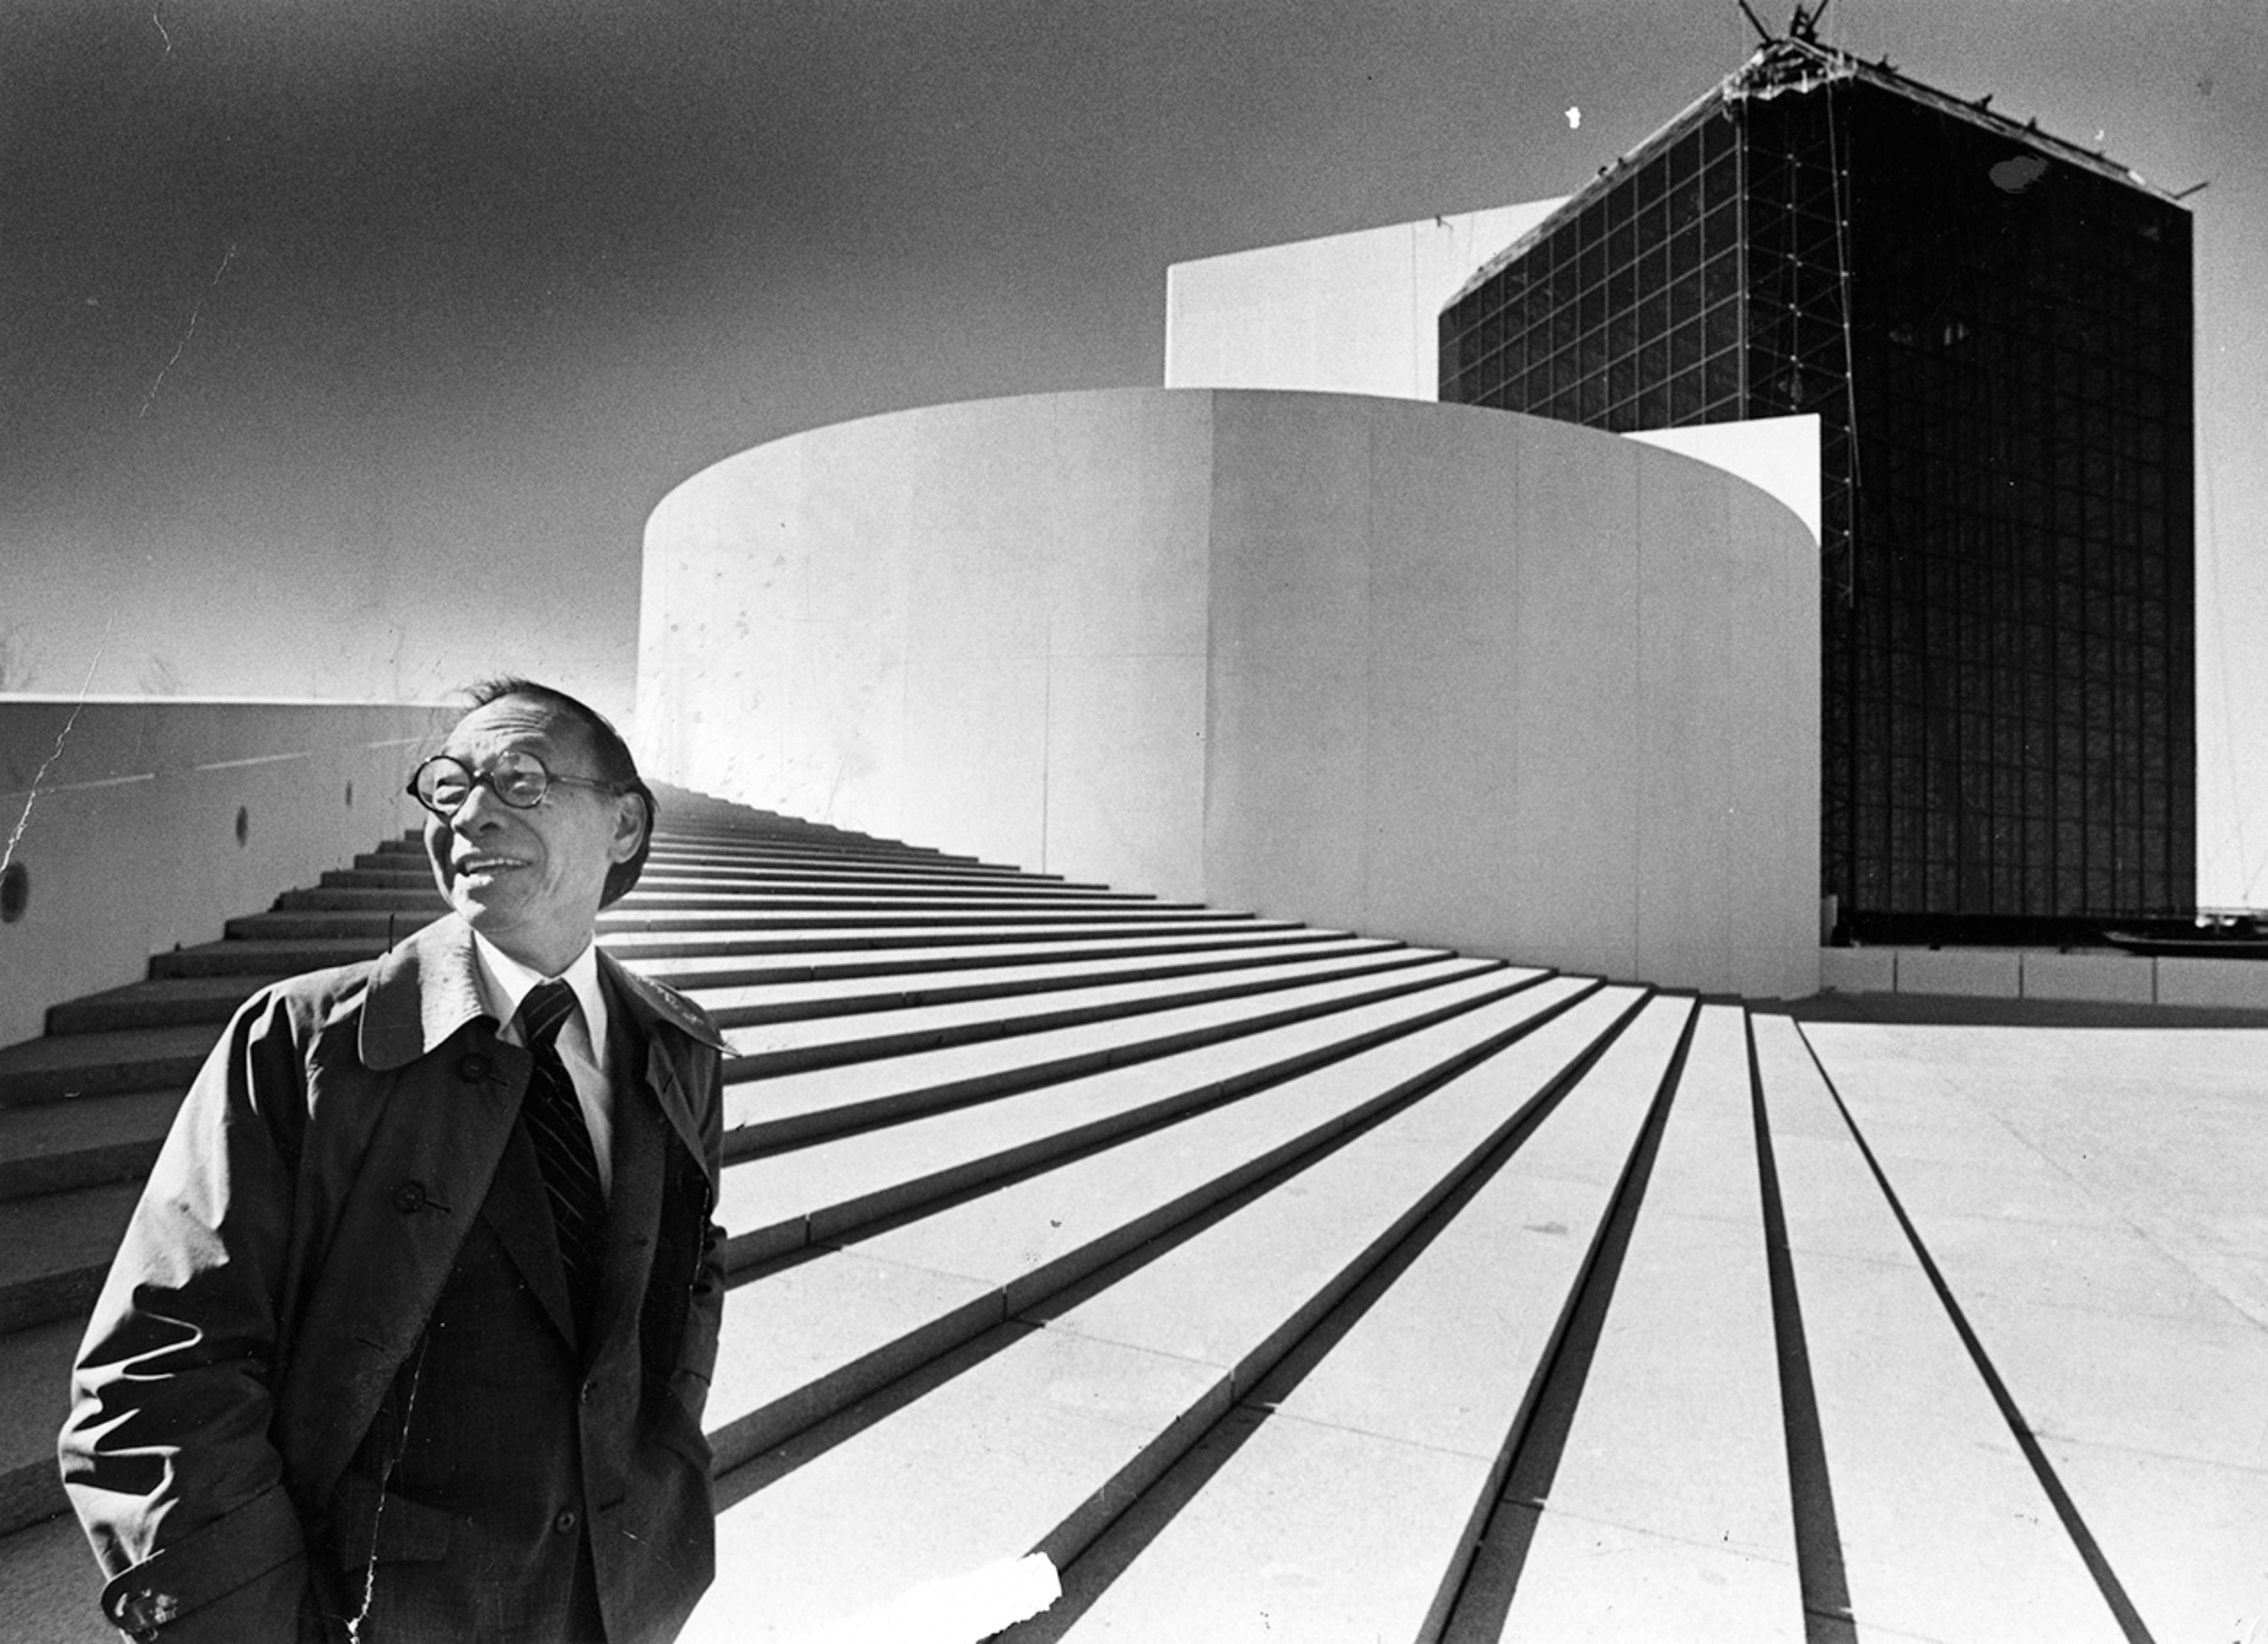 Learning from late architect I. M. Pei: “Architecture is not fashion”